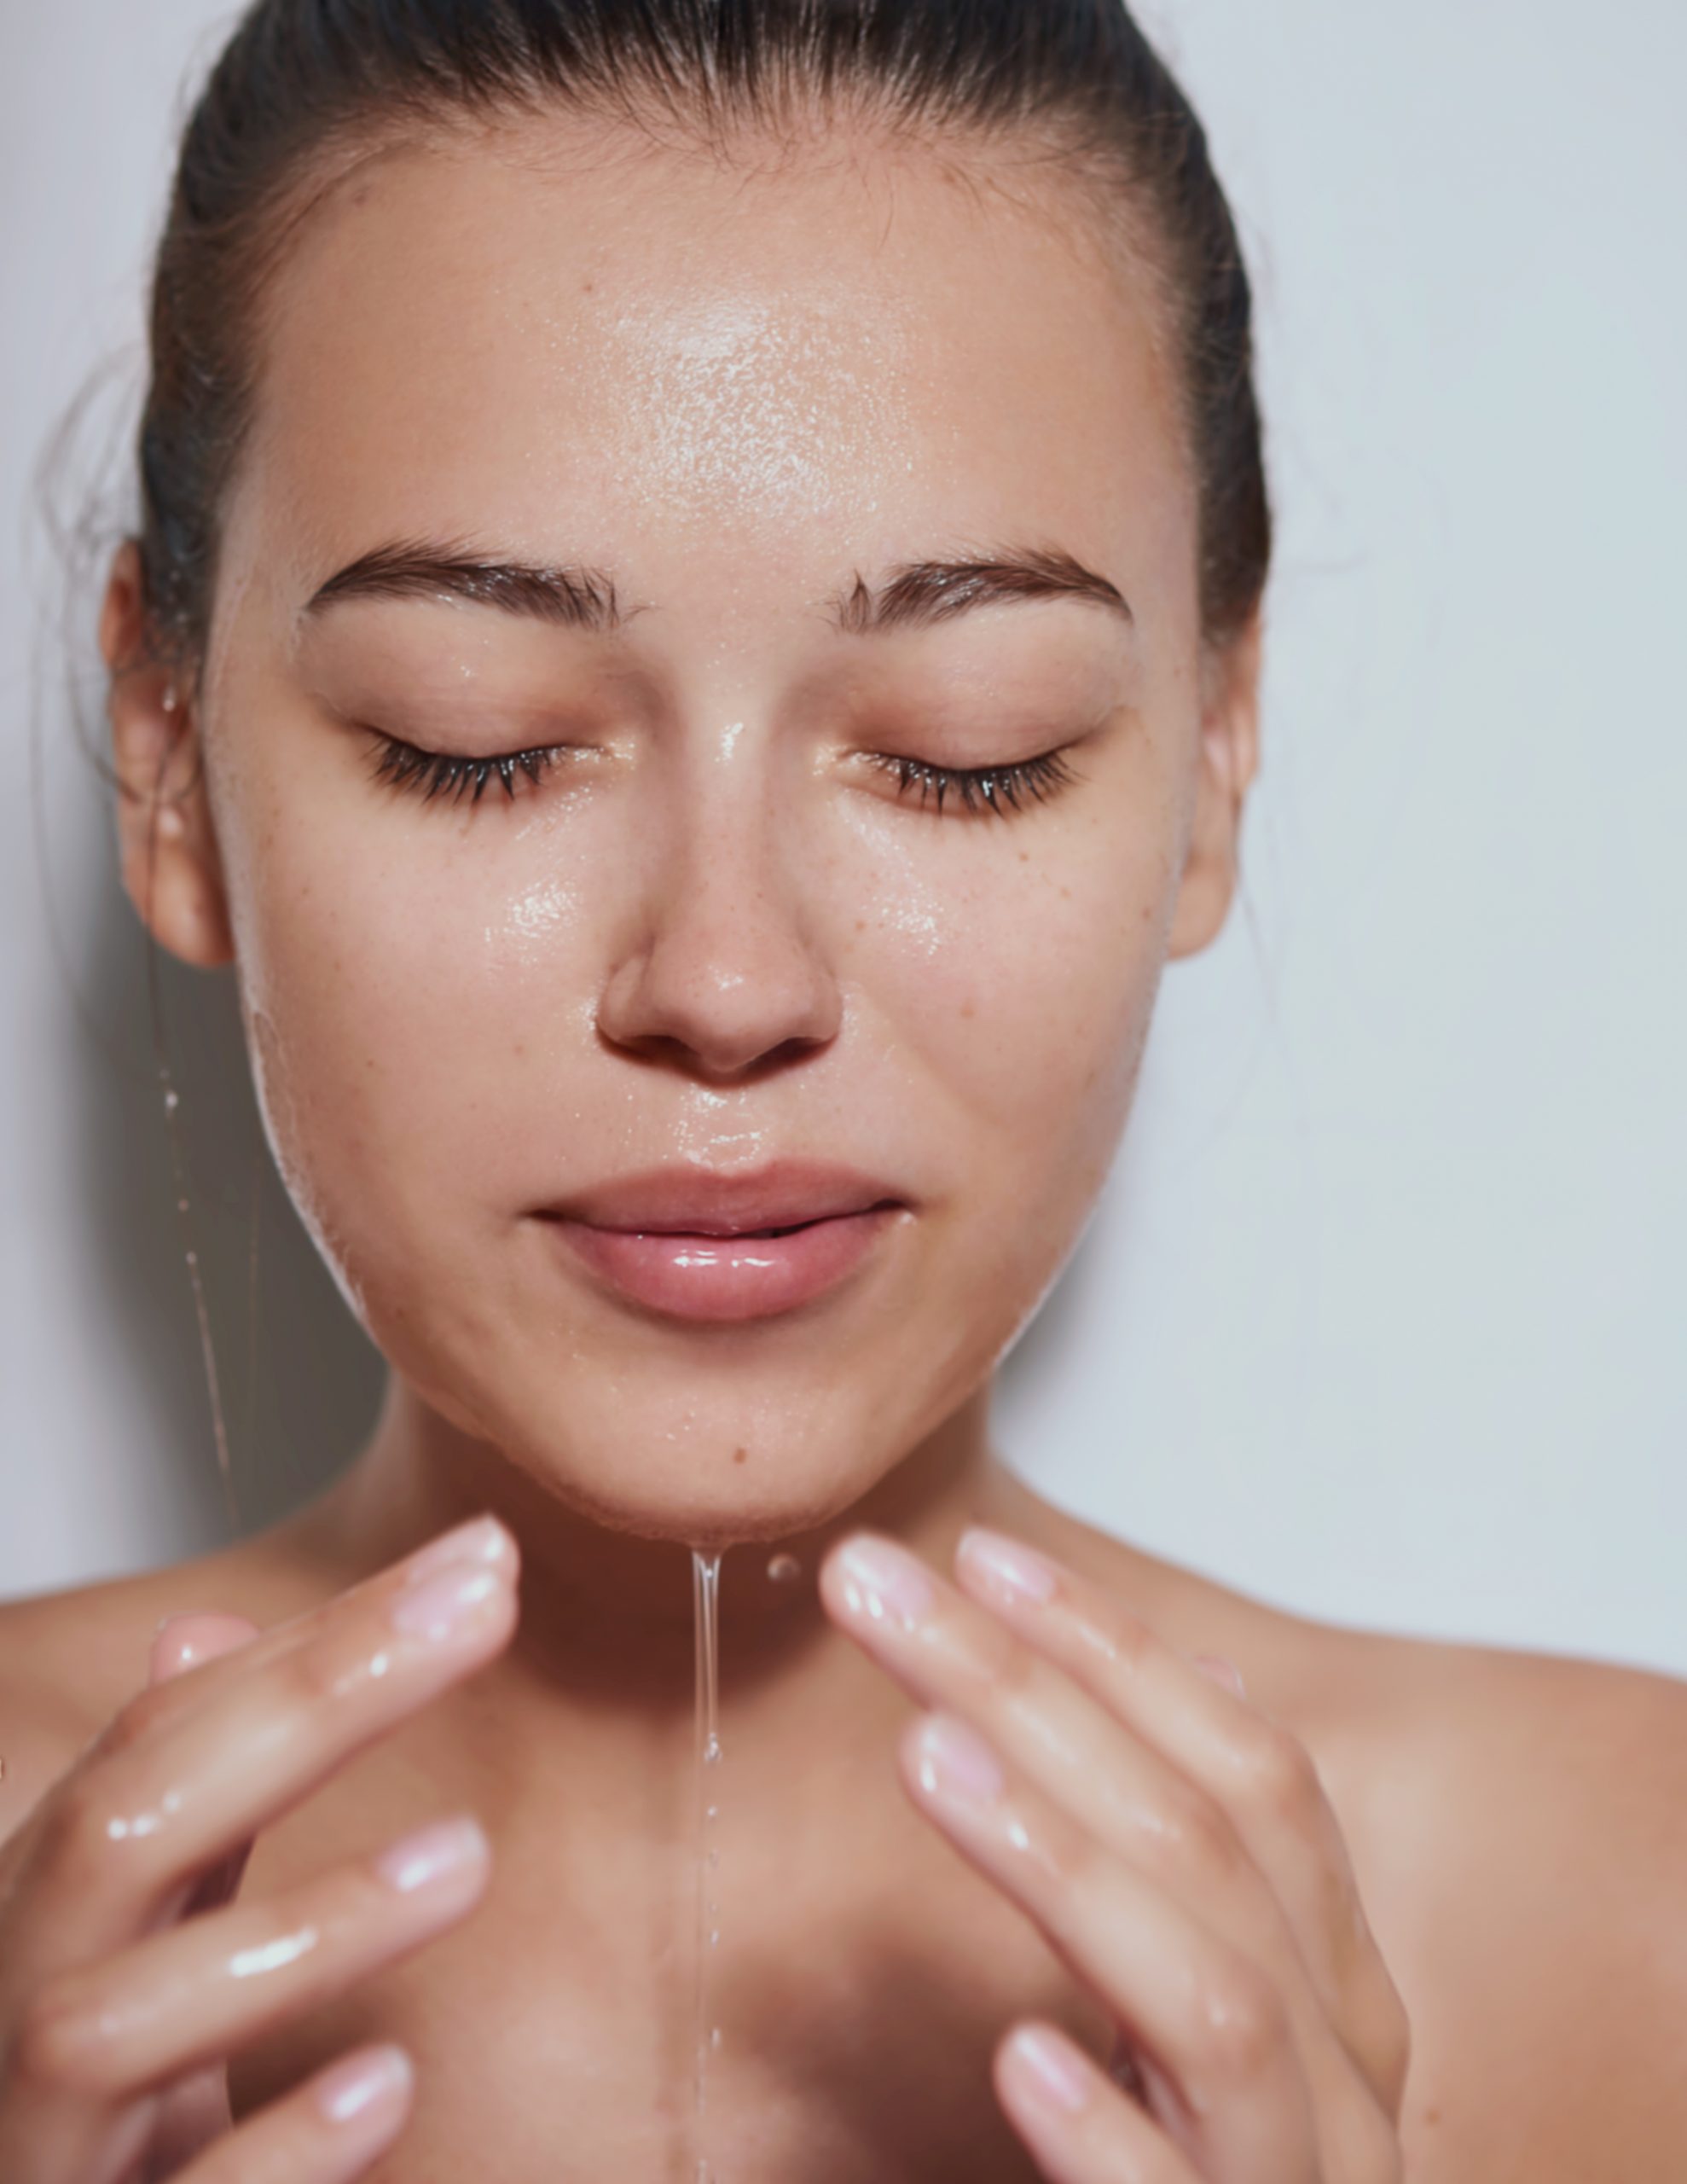 hyaluronic acid benefits - girl with wet, hydrated skin